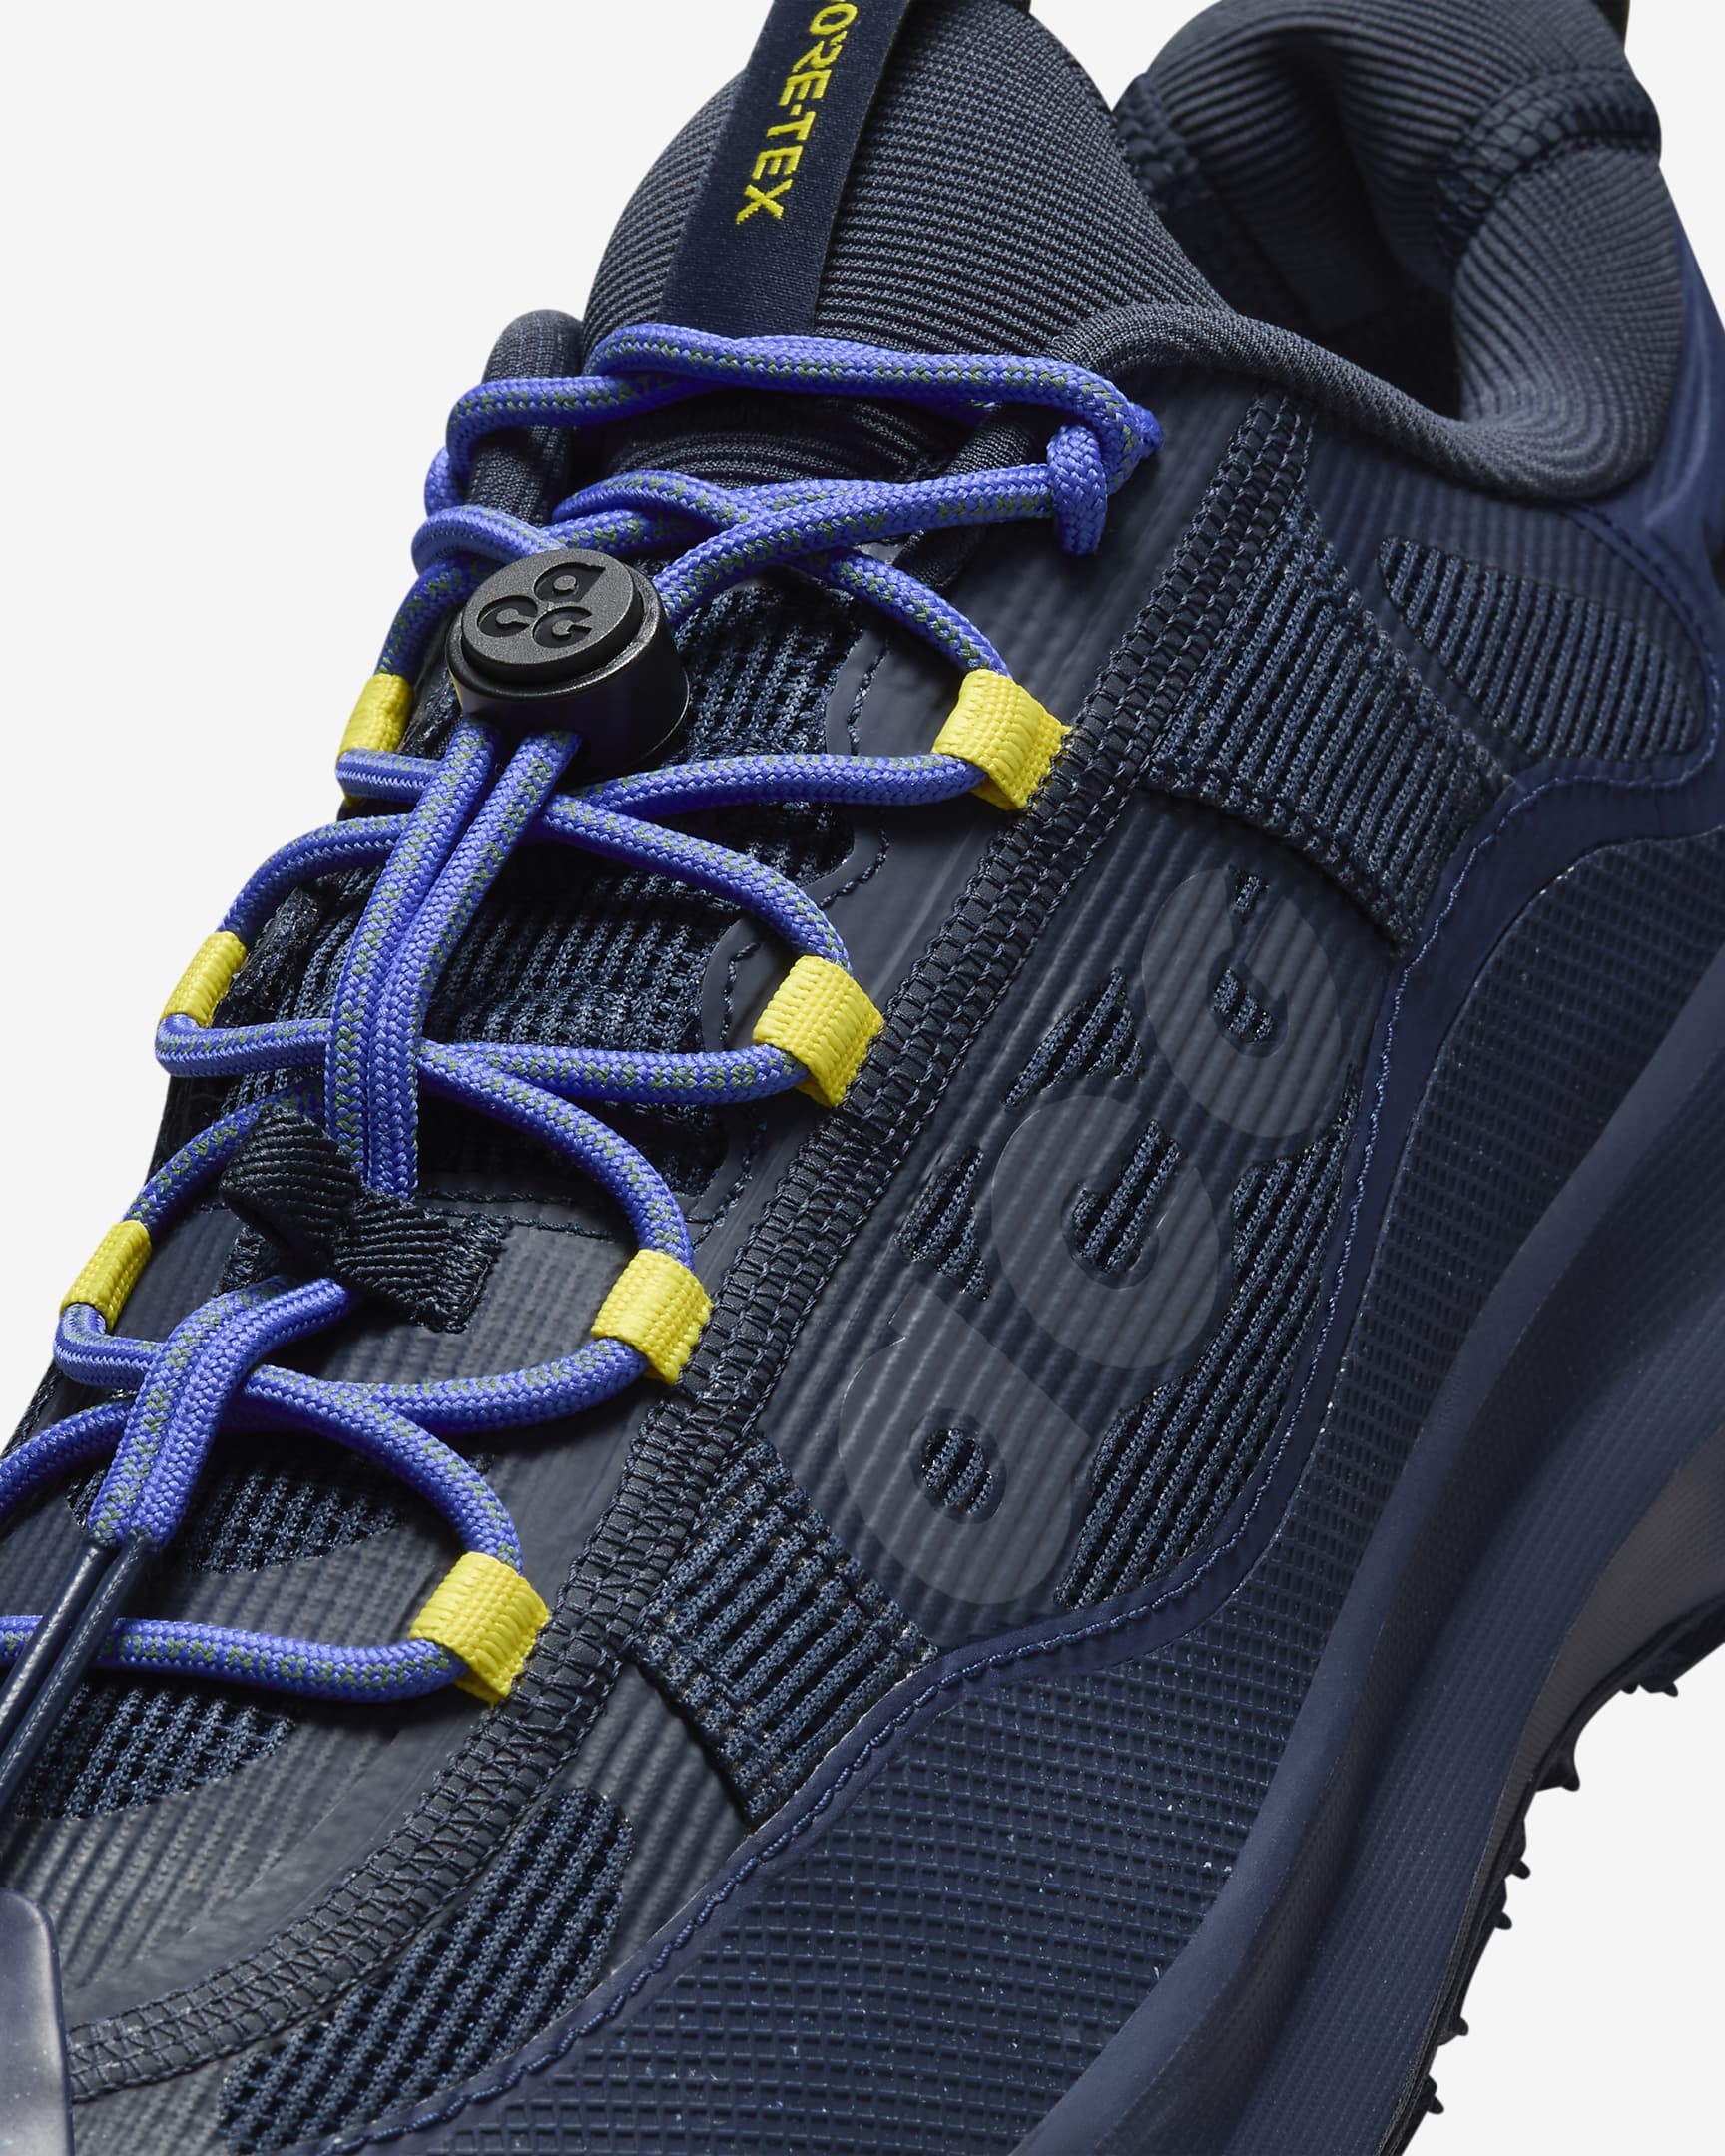 Nike ACG Mountain Fly 2 Low GORE-TEX Men's Shoes - Dark Obsidian/Midnight Navy/Persian Violet/Light Carbon